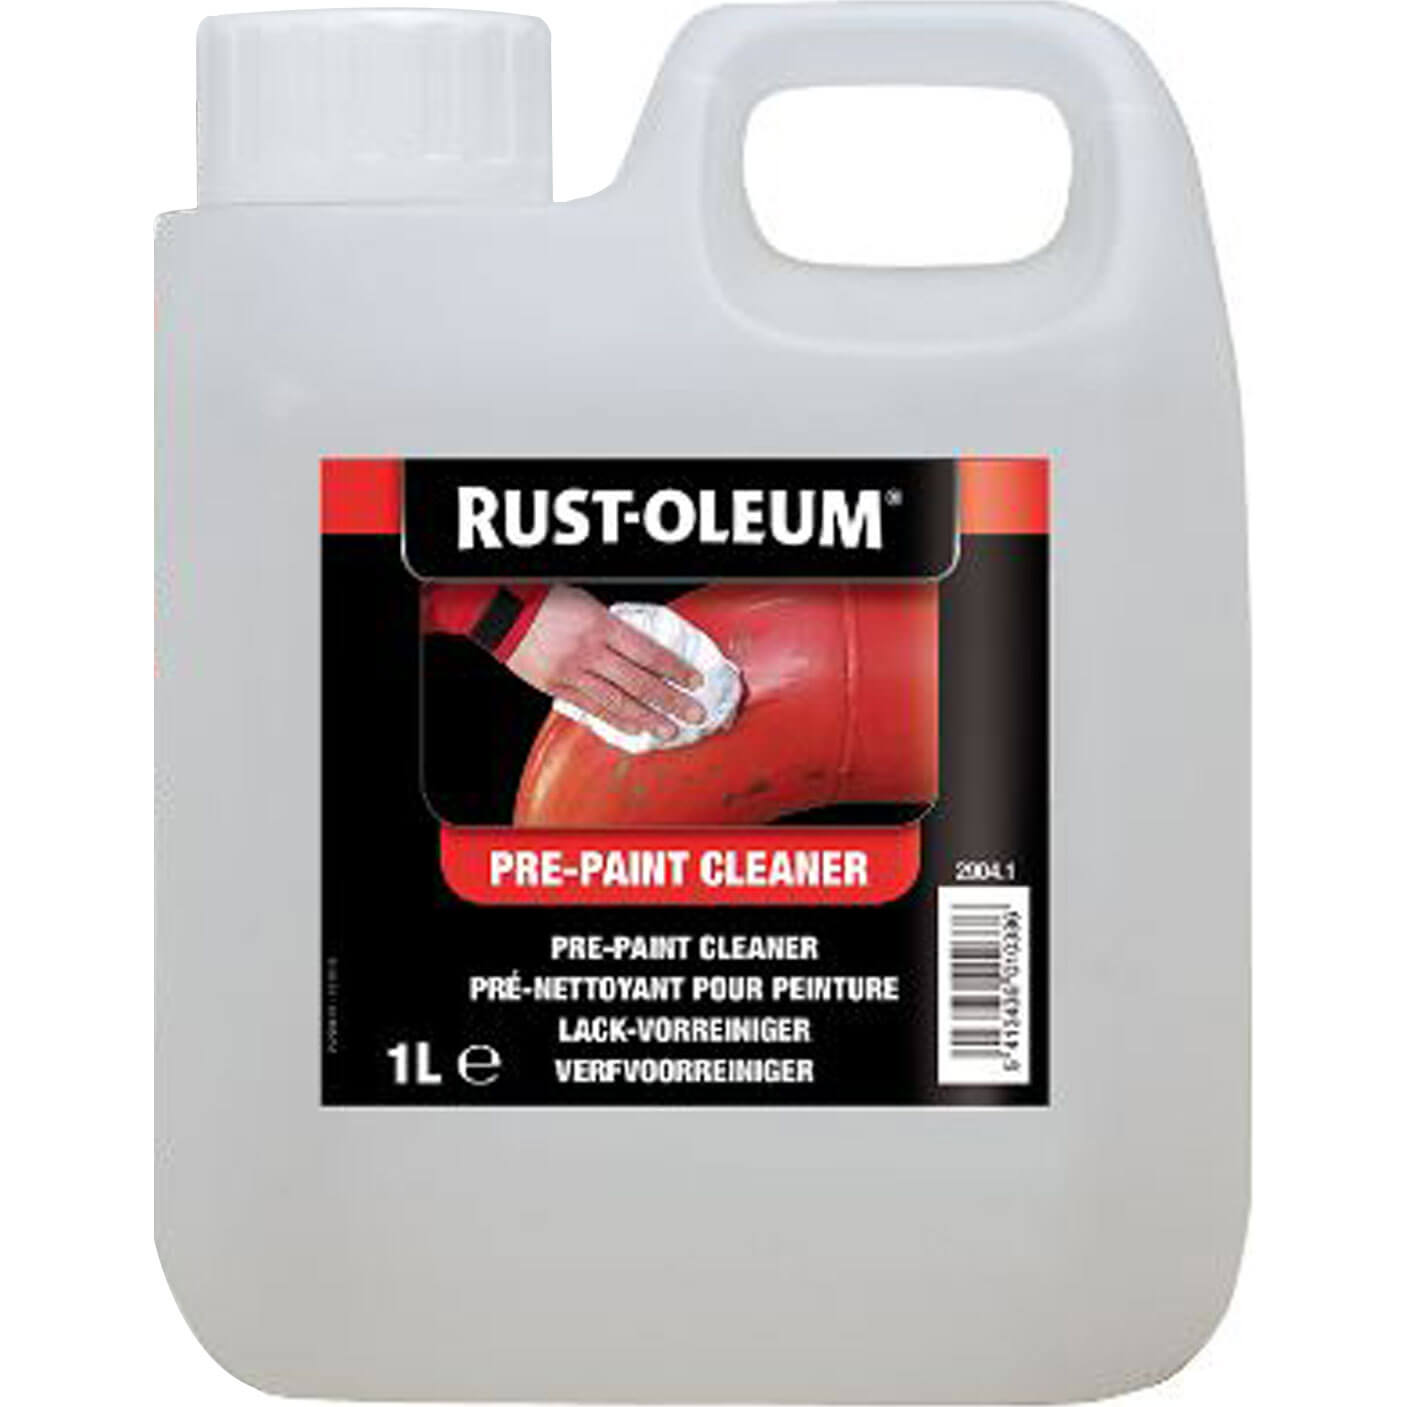 Photos - Other household chemicals Rust Oleum Pre-Paint Cleaner 1l 2904.1